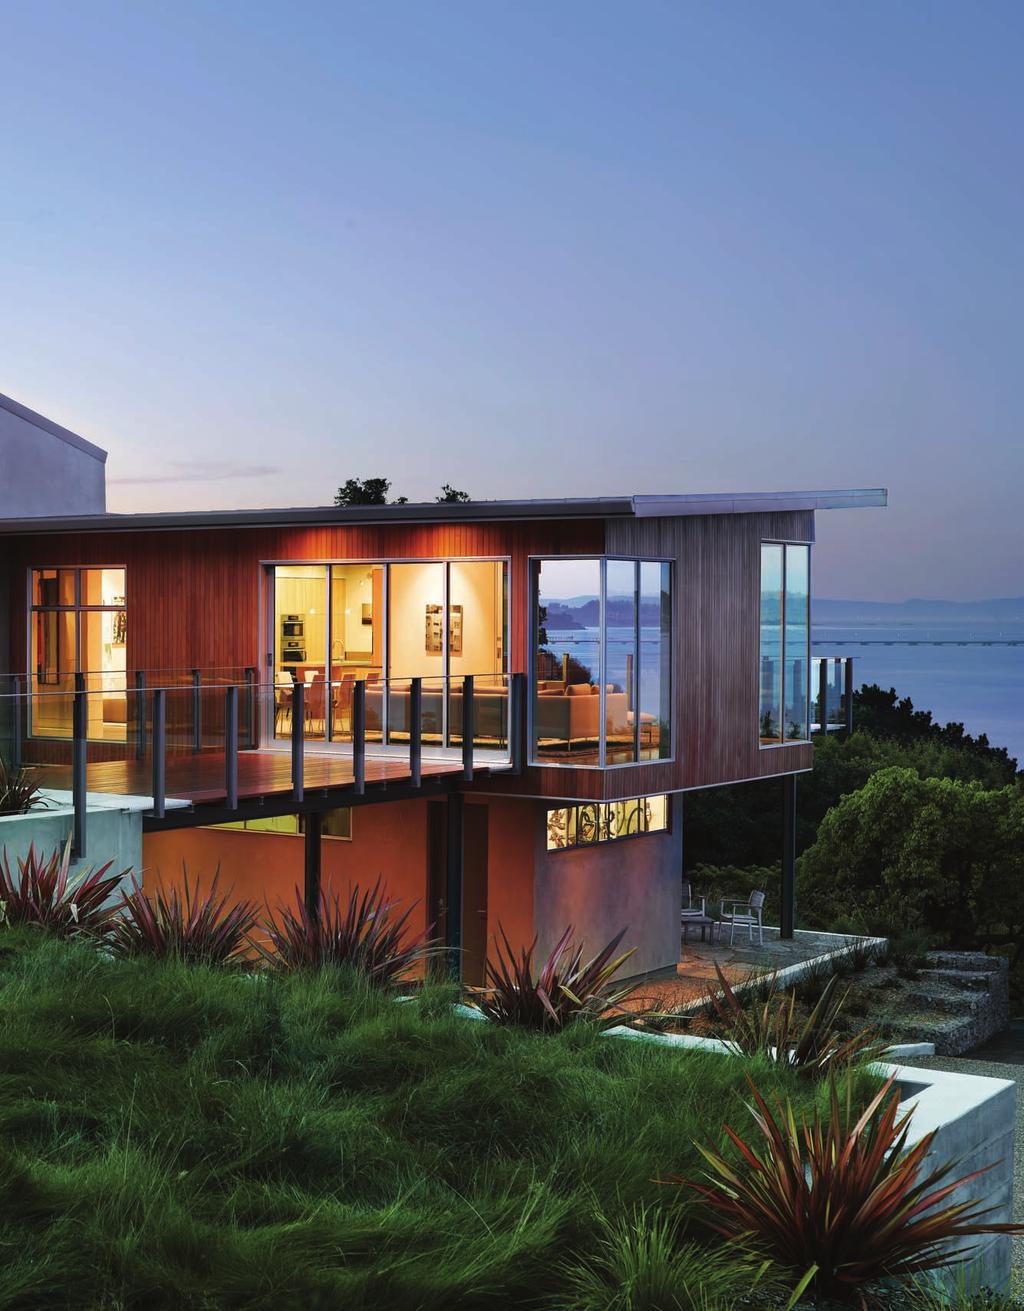 Above & Beyond An environmentally savvy homeowner takes the lead when creating her sustainable dream house high atop the